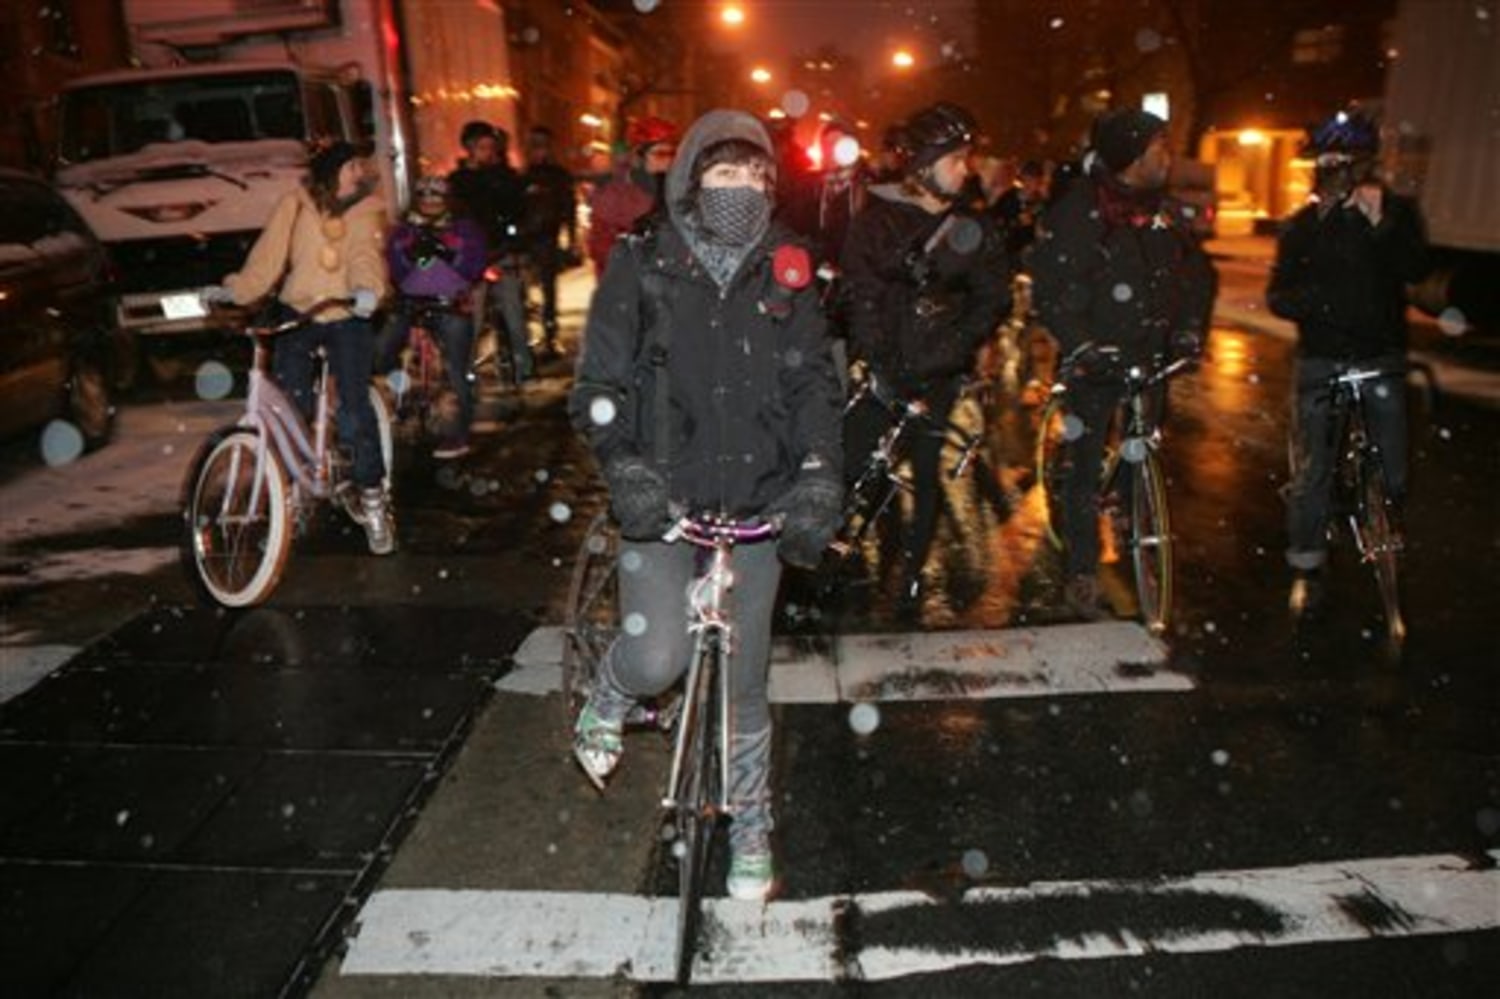 How to Keep Cyclists Riding Even in the Snowy Winter - Bloomberg